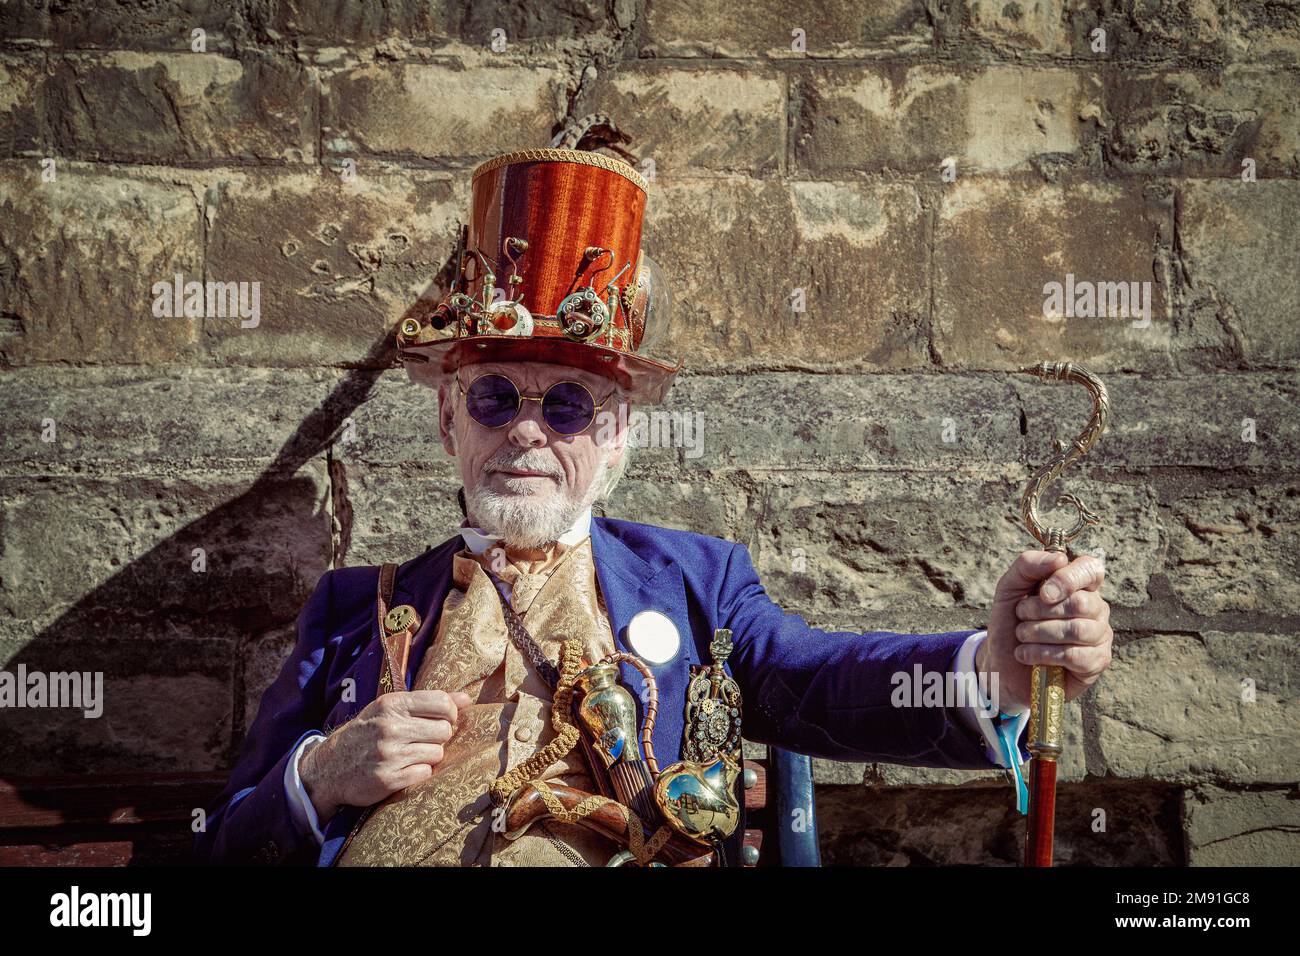 A stylish male wearing retro futuristic steampunk clothing and a wooden top hat. Stock Photo